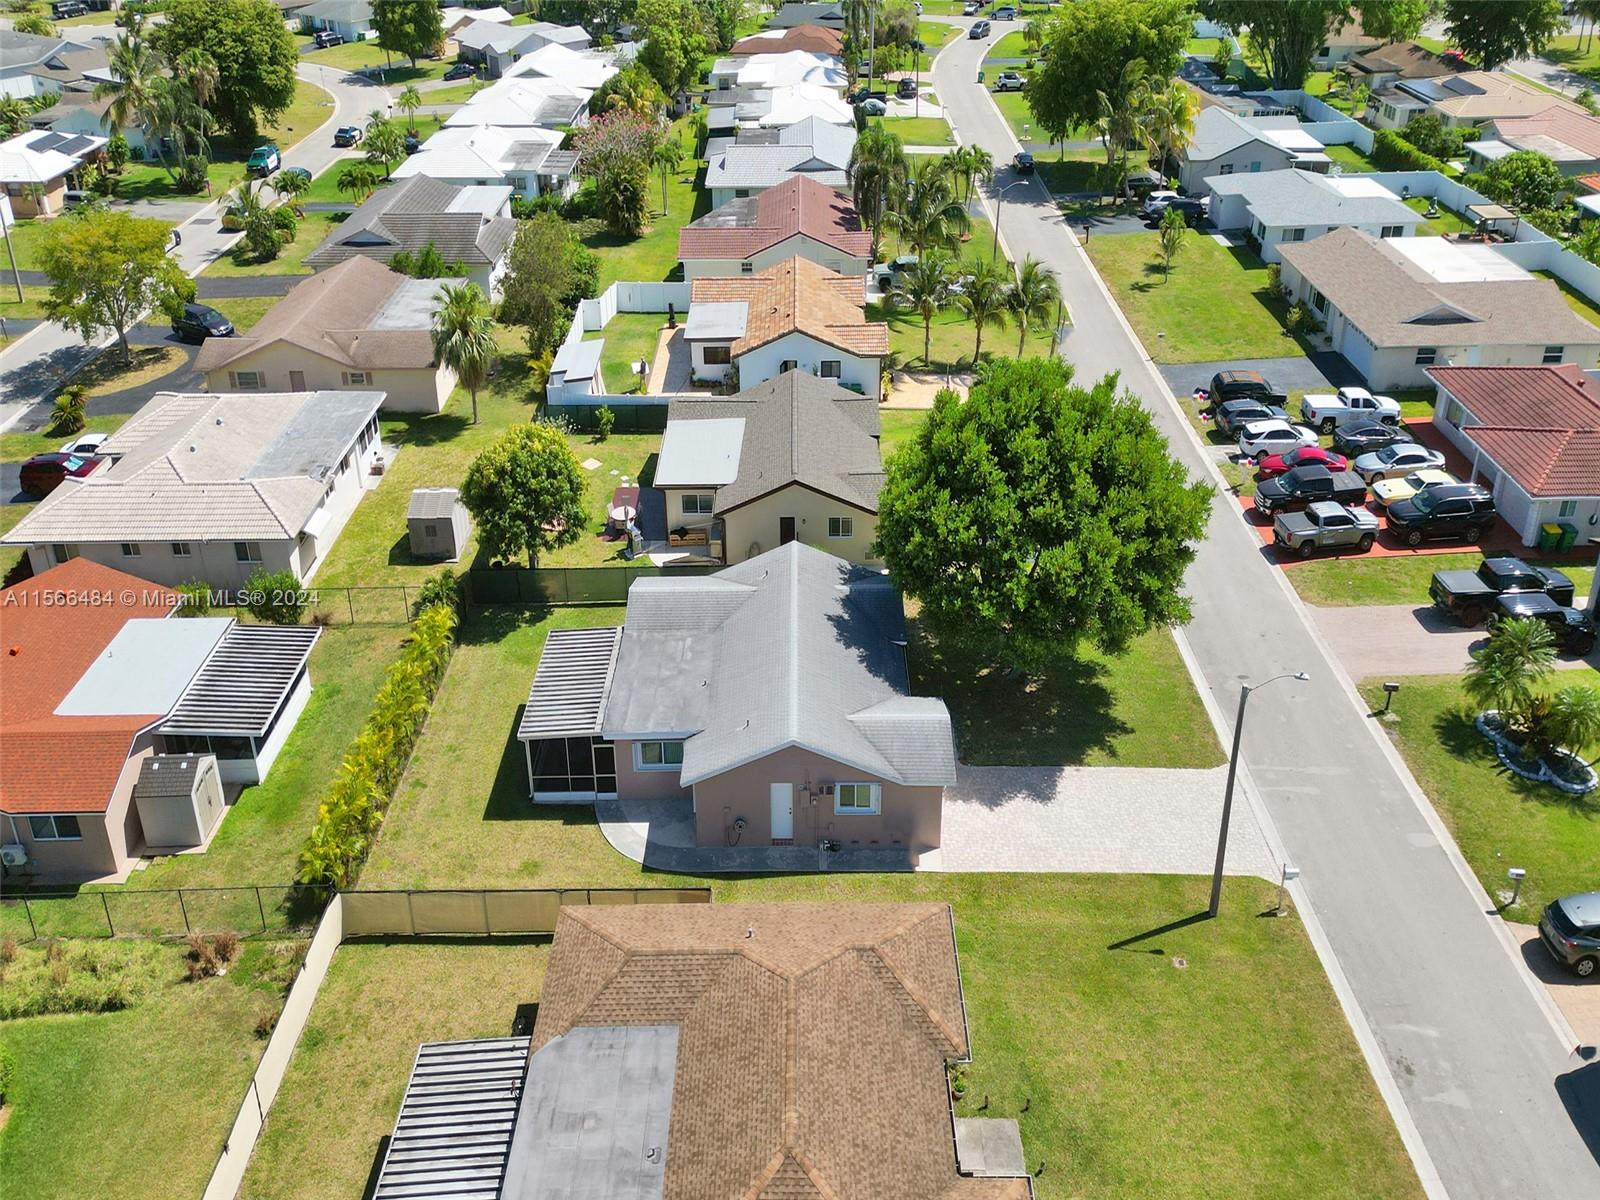 an aerial view of a house with a garden